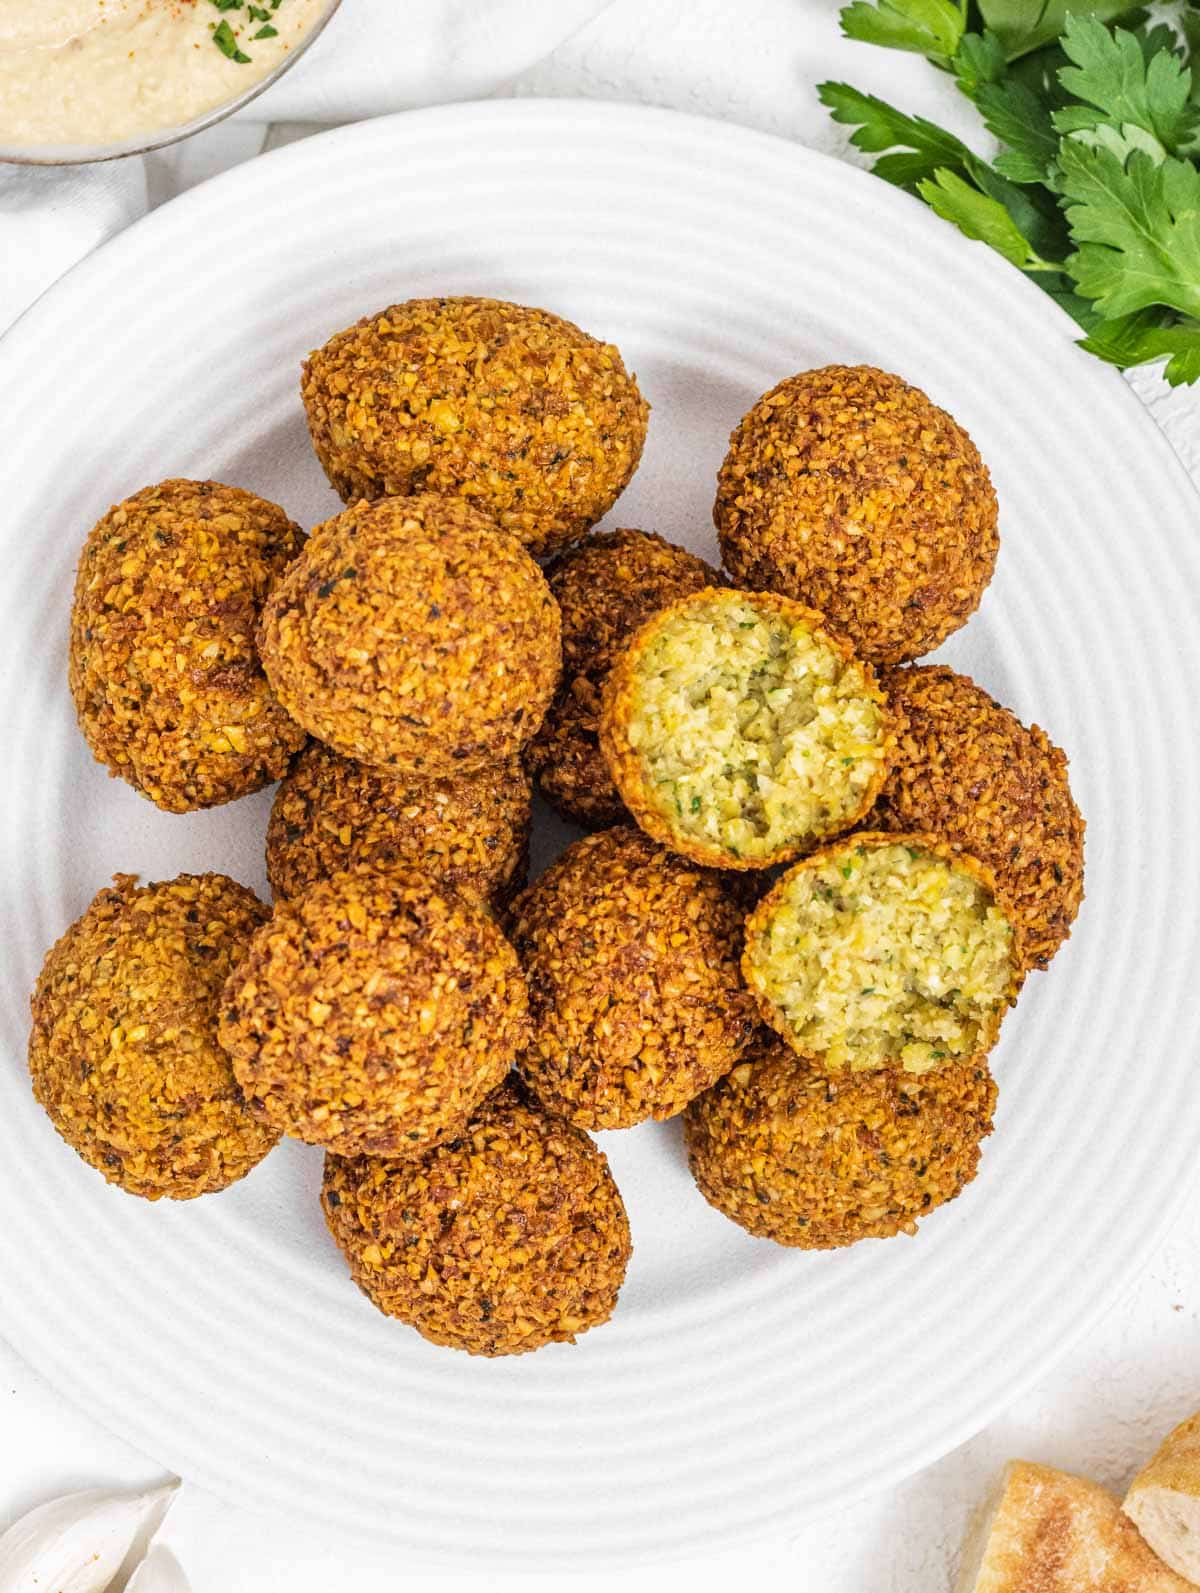 Falafel on a plate with parsley